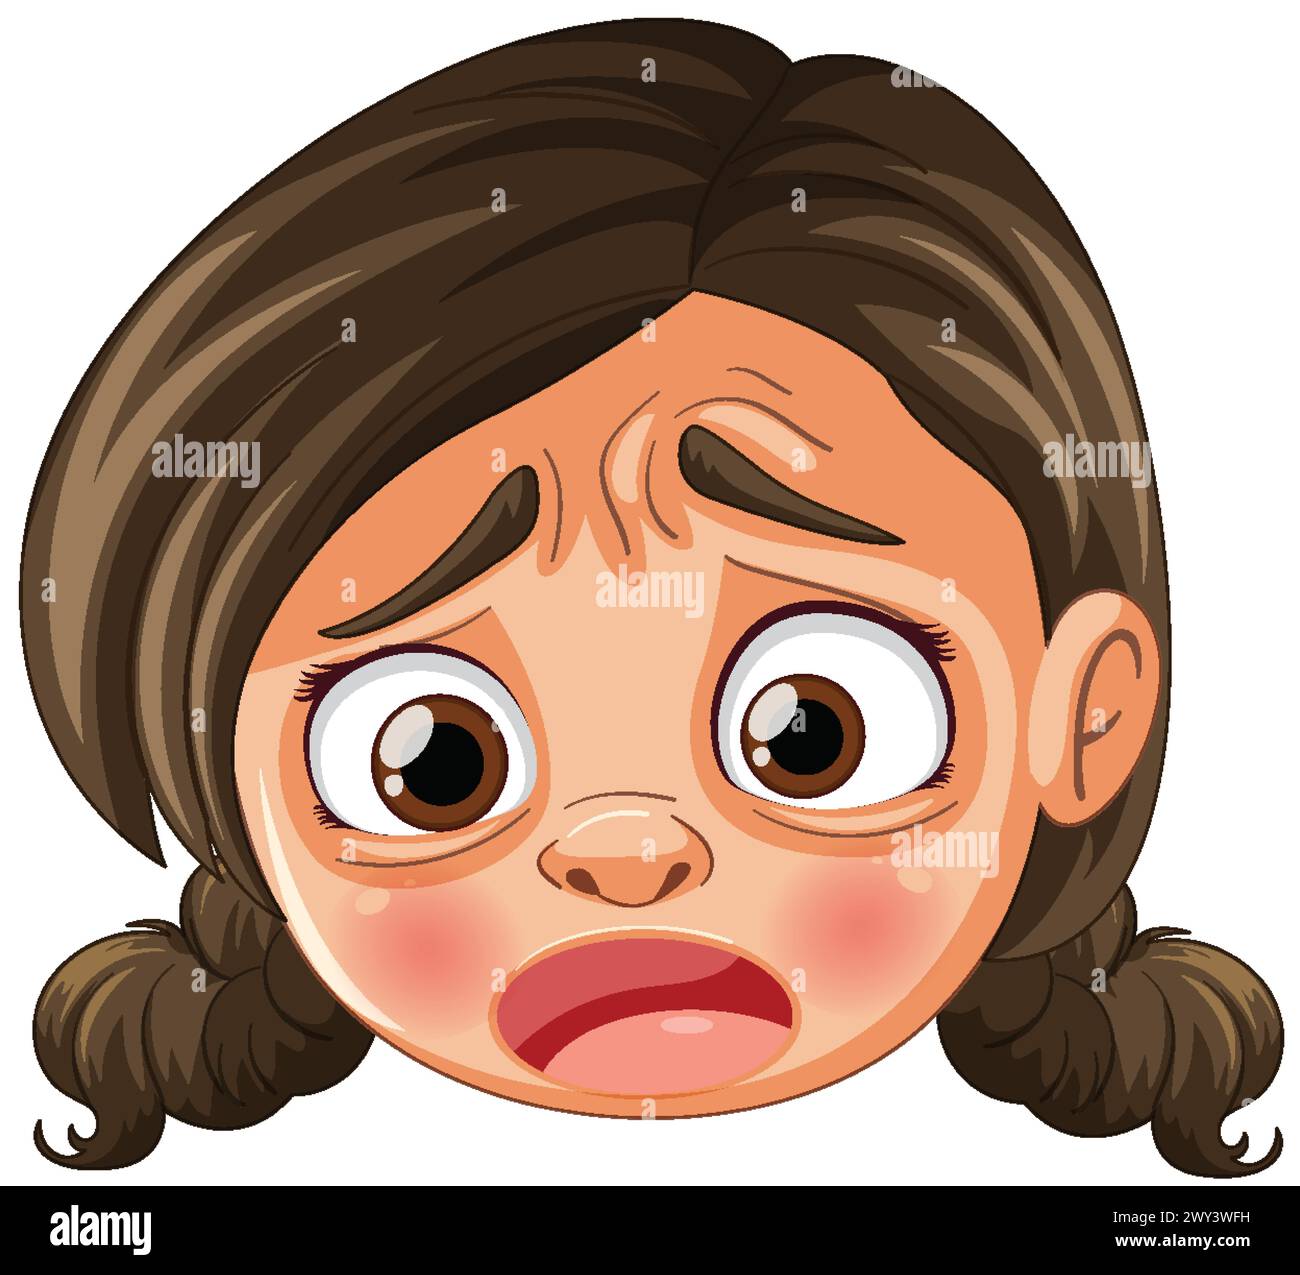 Vector illustration of a girl with a concerned face. Stock Vector